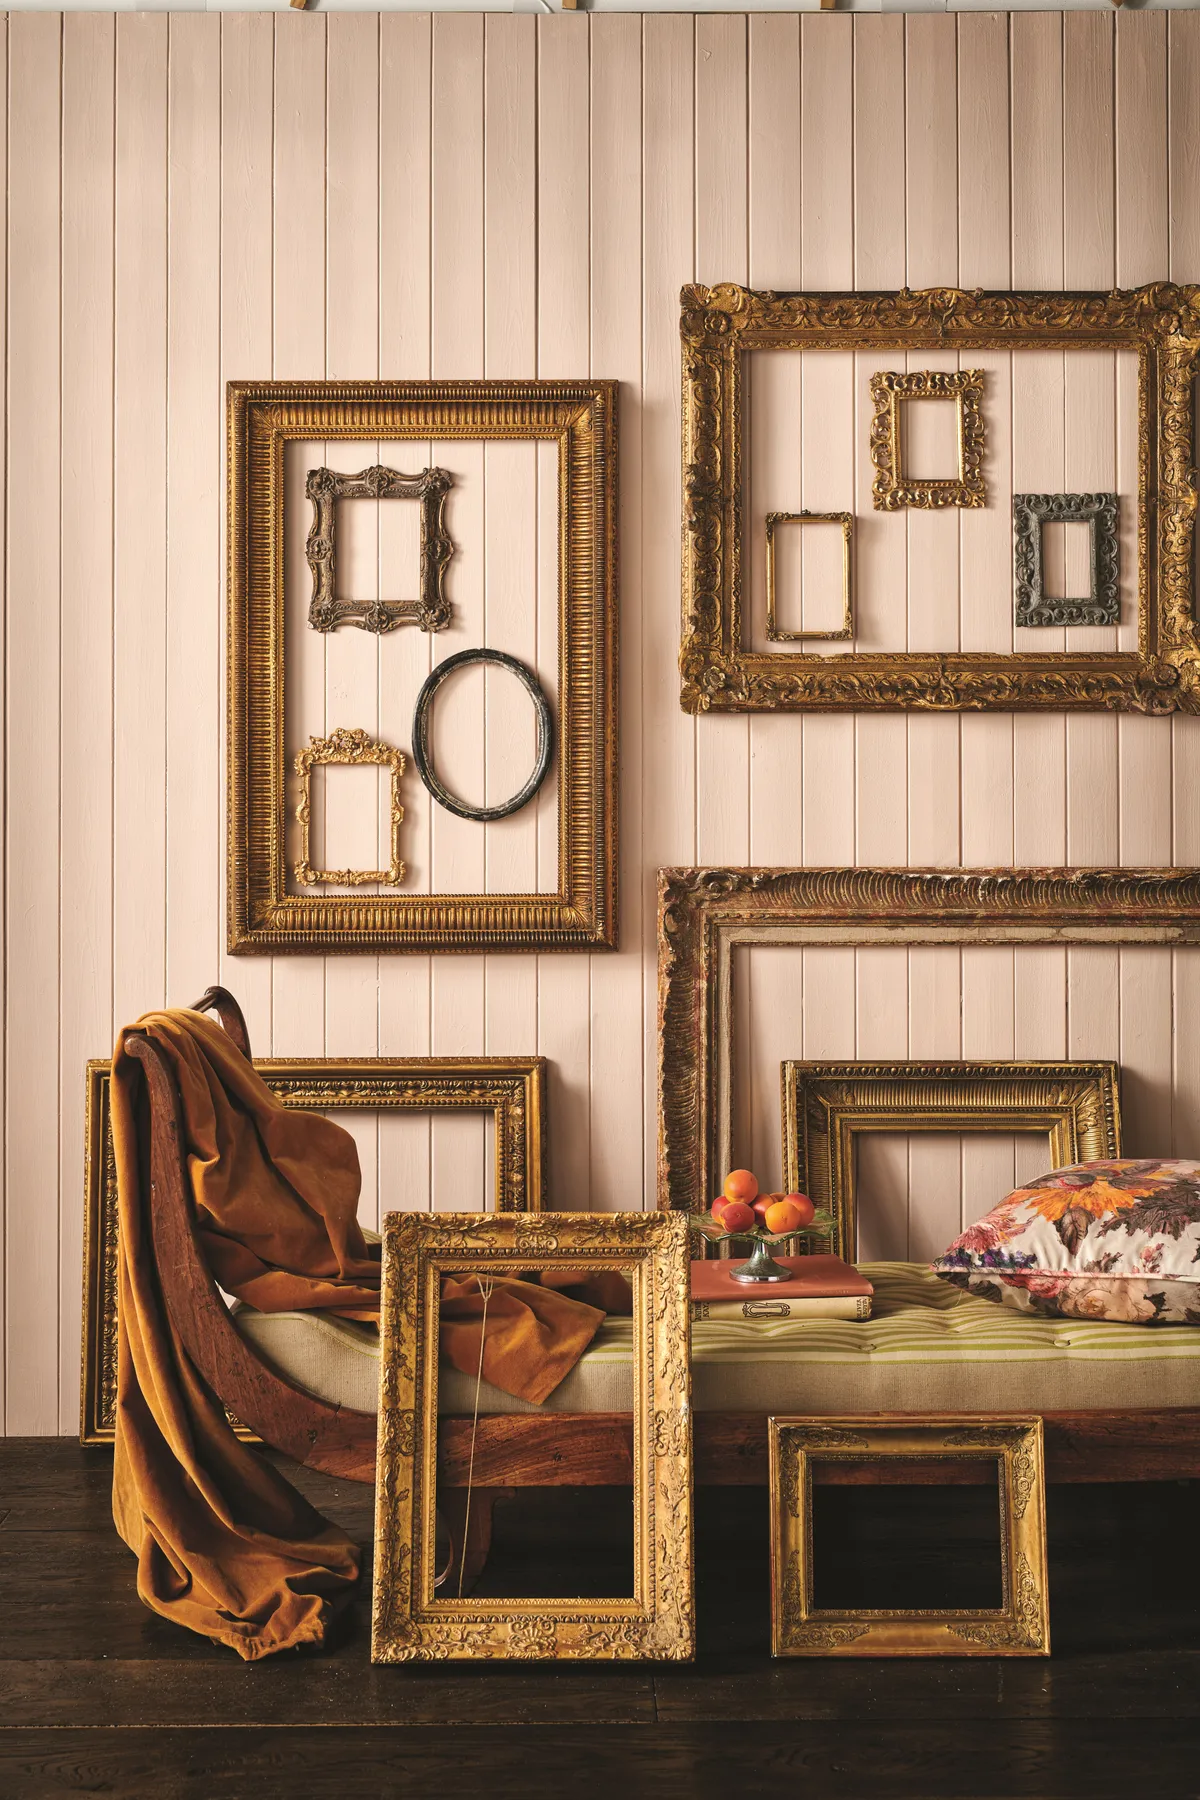 Small antique frames displayed in clusters on a pale pink panelled wall